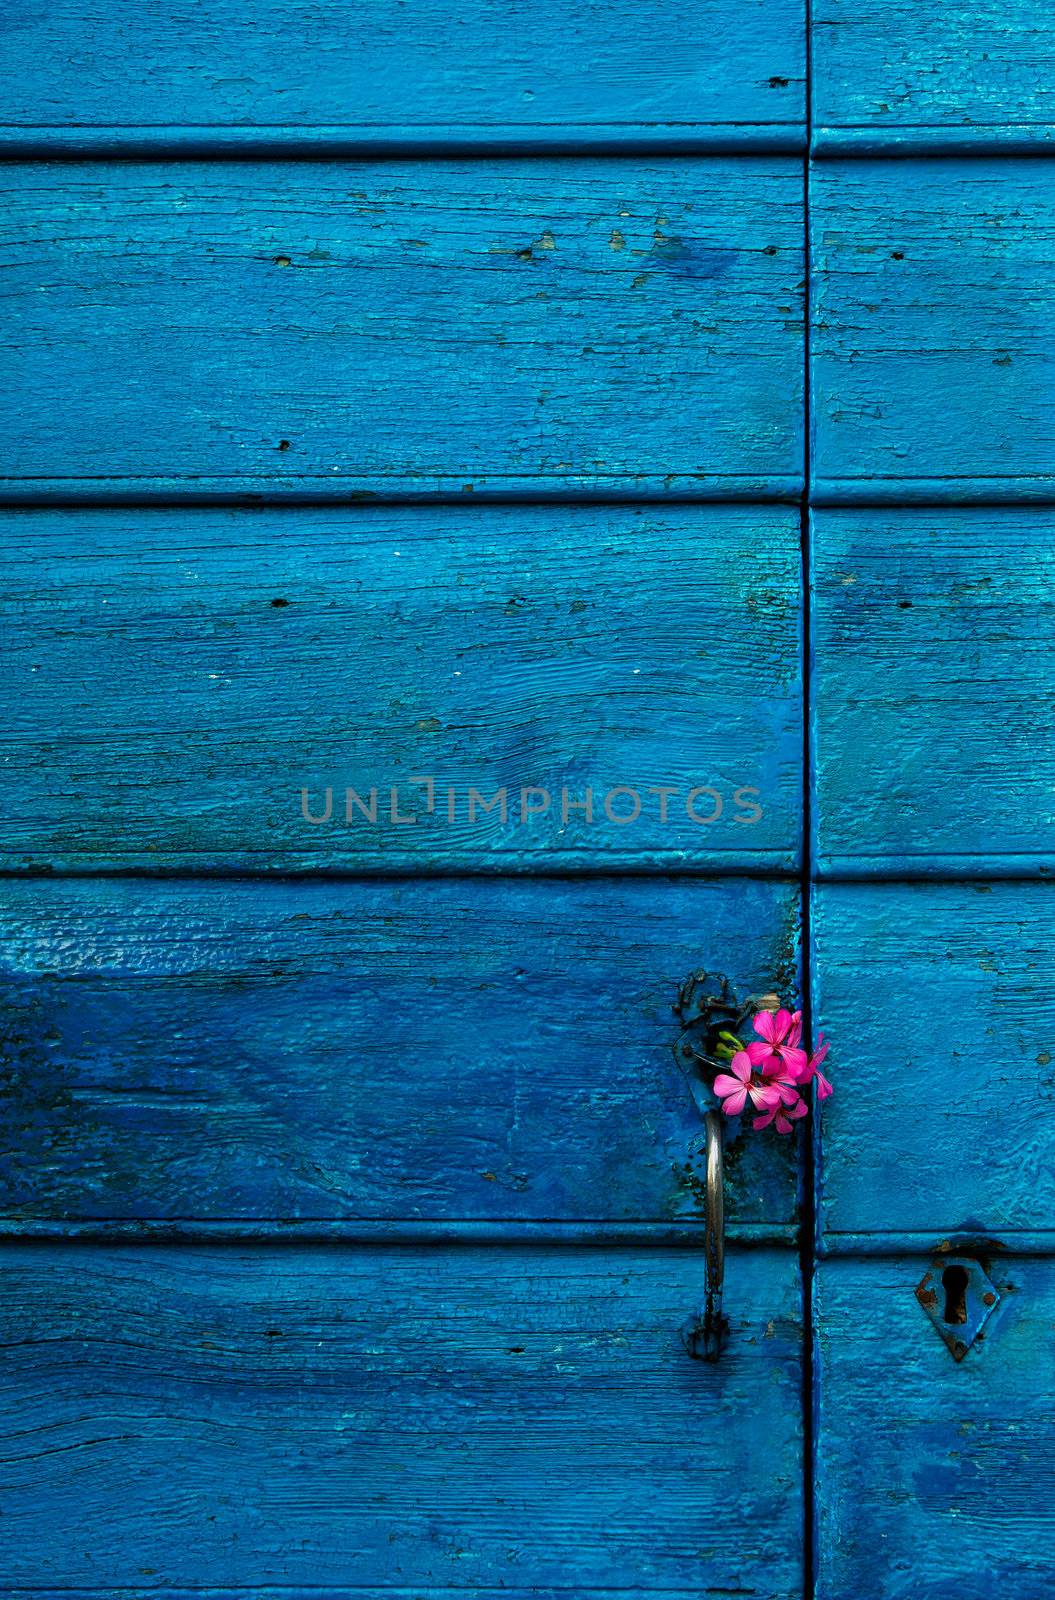 Image shows a highly textured blue door with some small violet flowers on the handle